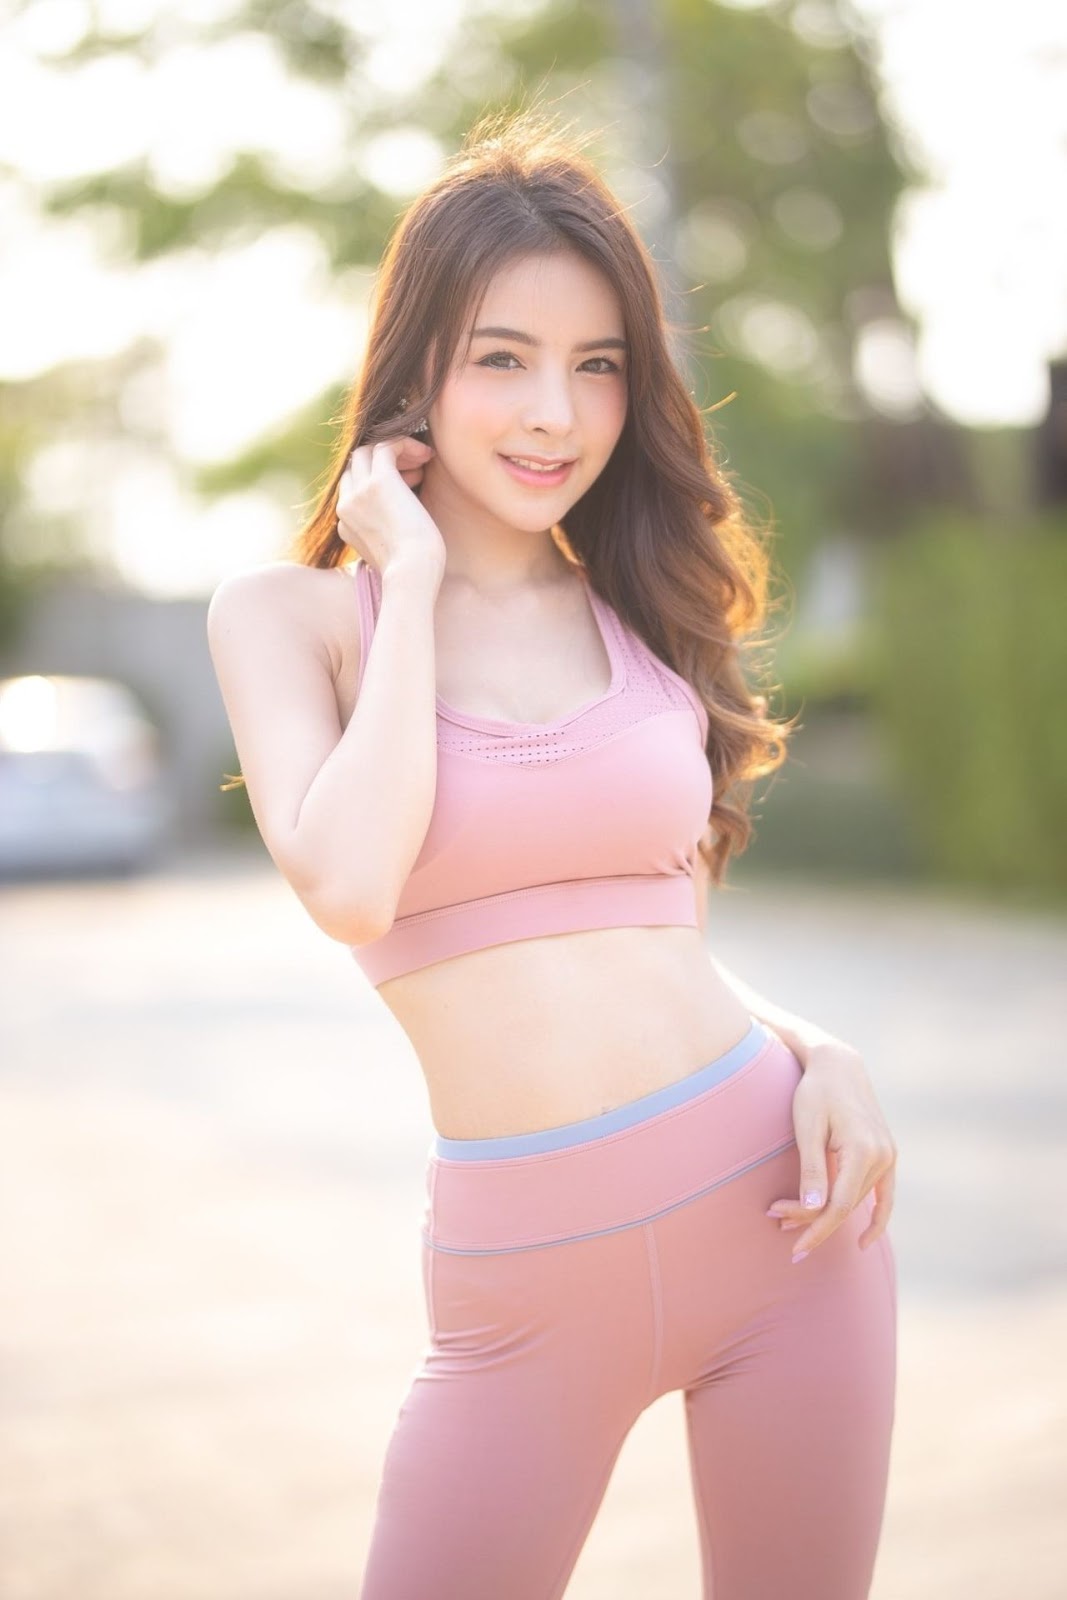 Image-Thailand-Beautiful-Model-Soithip-Palwongpaisal-Pink-Fitness-Girl-TruePic.net- Picture-19